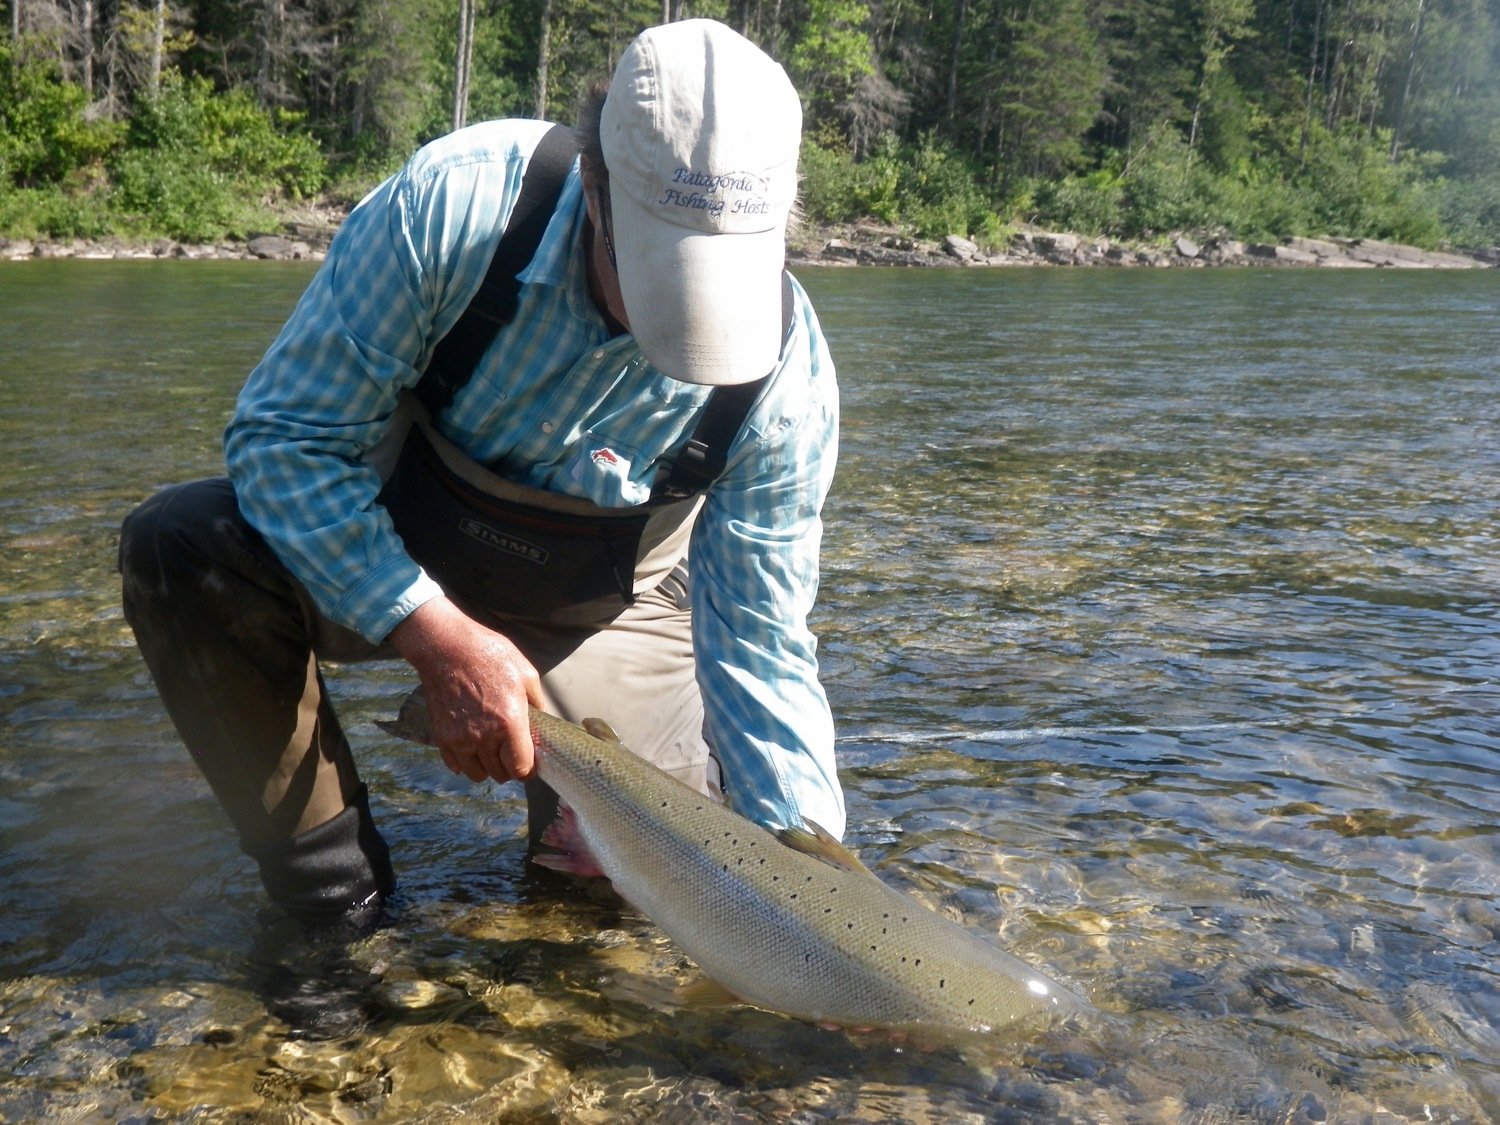 Harrison O'Connor has been coming toCamp Bonaventure Fishing Report for years, he always fishes with a dry fly, no doubt what this one was caught on, nice on Harrison!